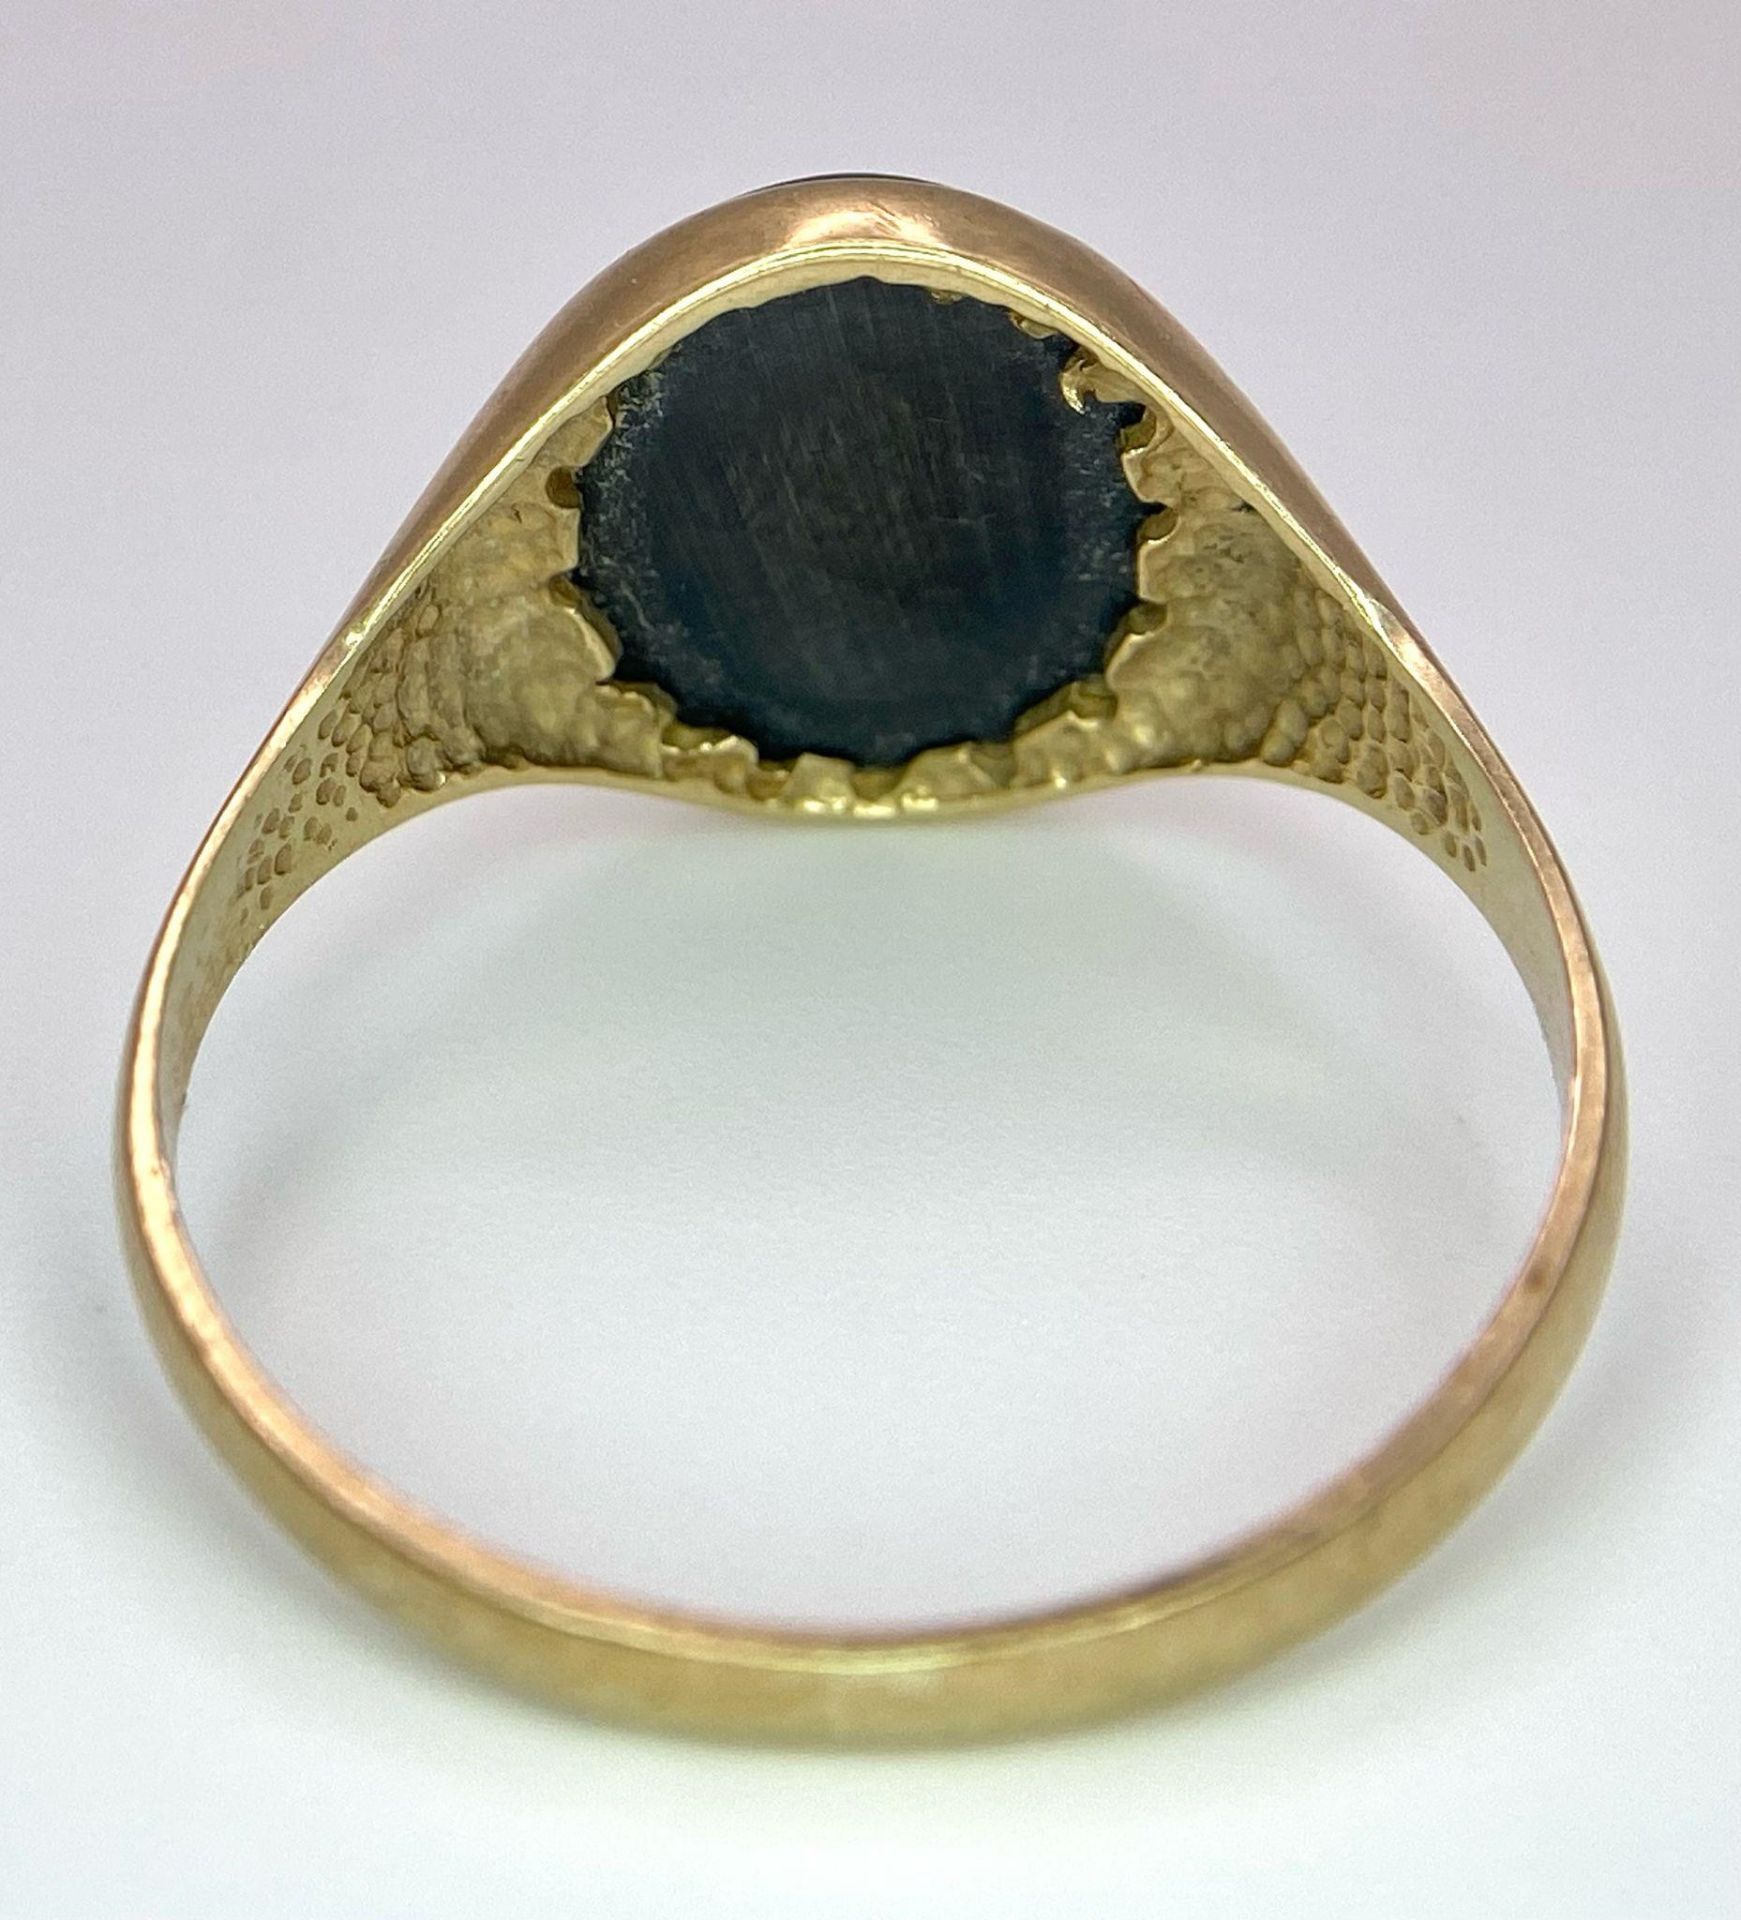 A Vintage 9K Yellow Gold Onyx Signet Ring. Carved centurion decoration. Size T. 3g total weight. - Image 5 of 6